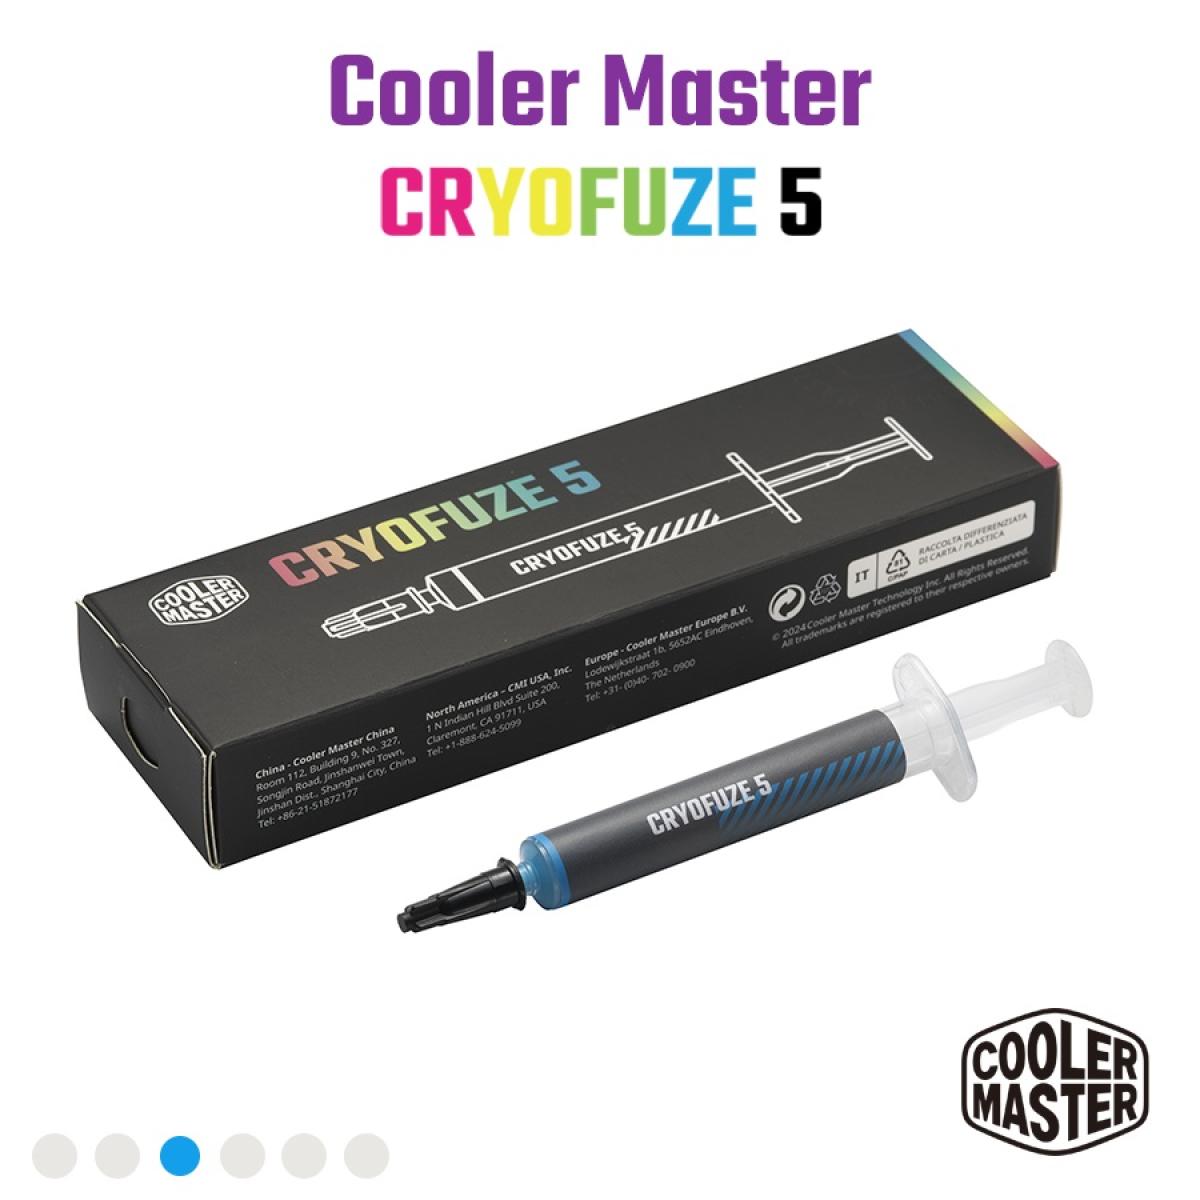 Cooler Master CRYOFUZE 5 (Blue) High performance Thermal Paste, 12.6 W/mK High Thermal Conductivity w/ Low Thermal Impedance - 3g Weight